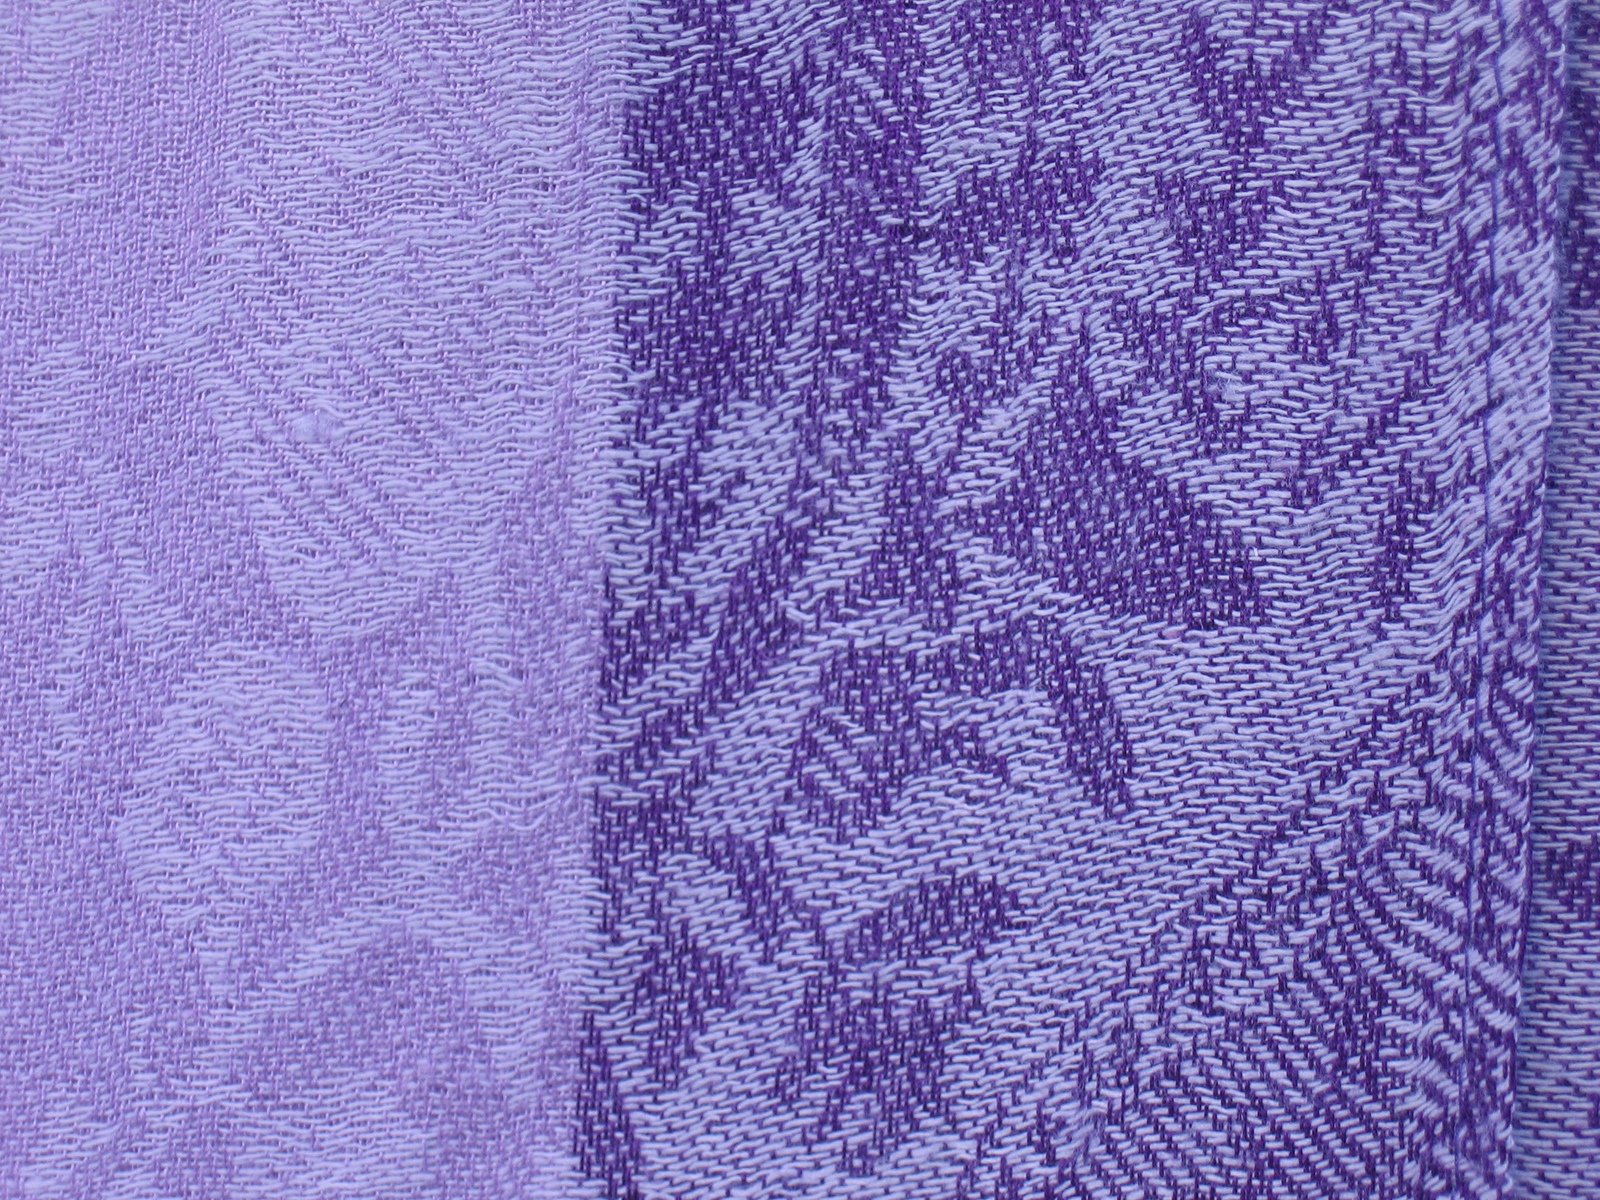 a close up s of the fabric material that looks like a purple cloth